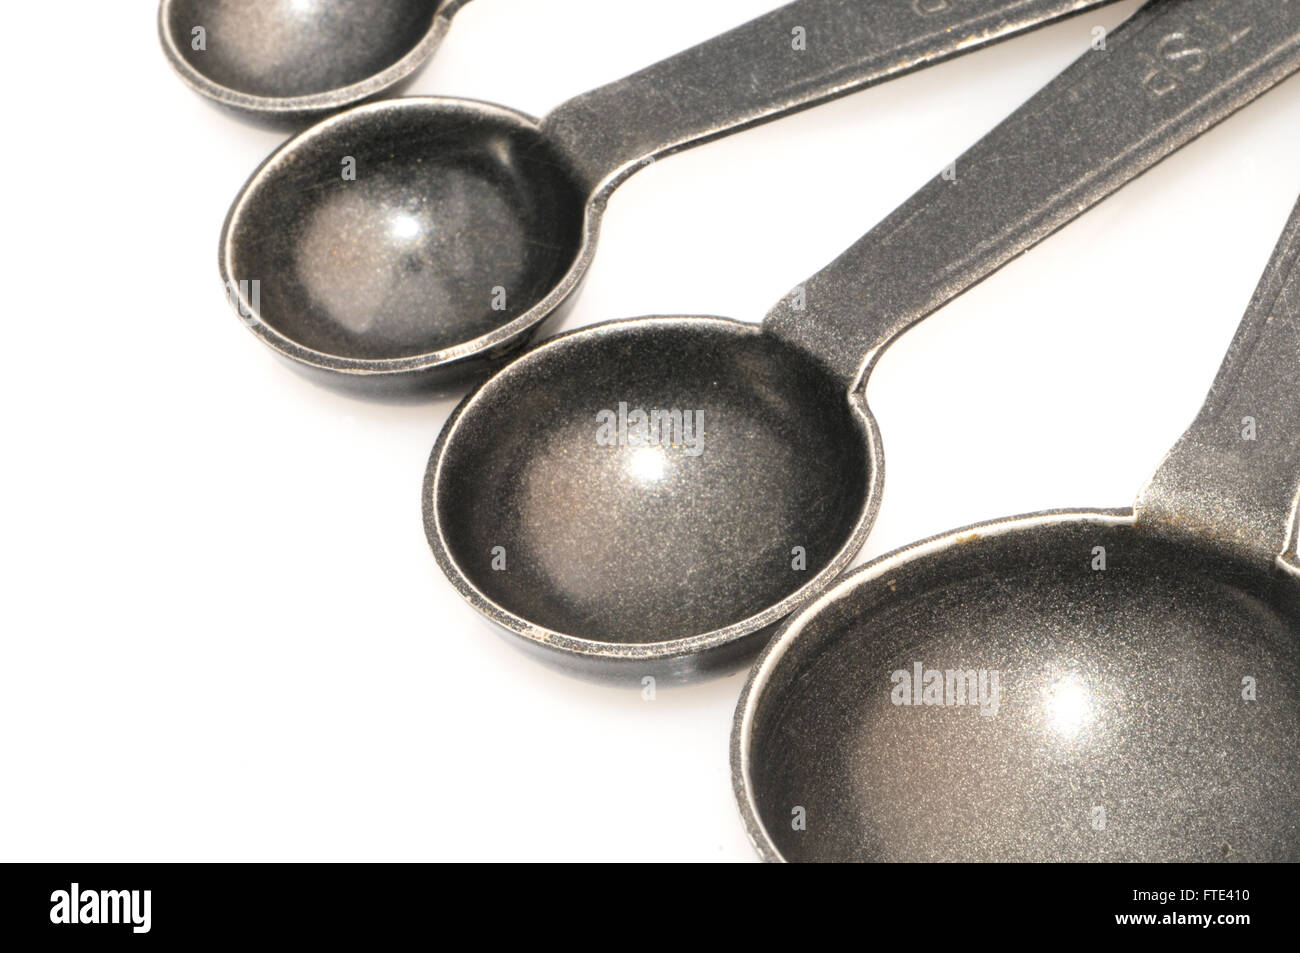 Four metal measuring spoons isolated on white background. Stock Photo